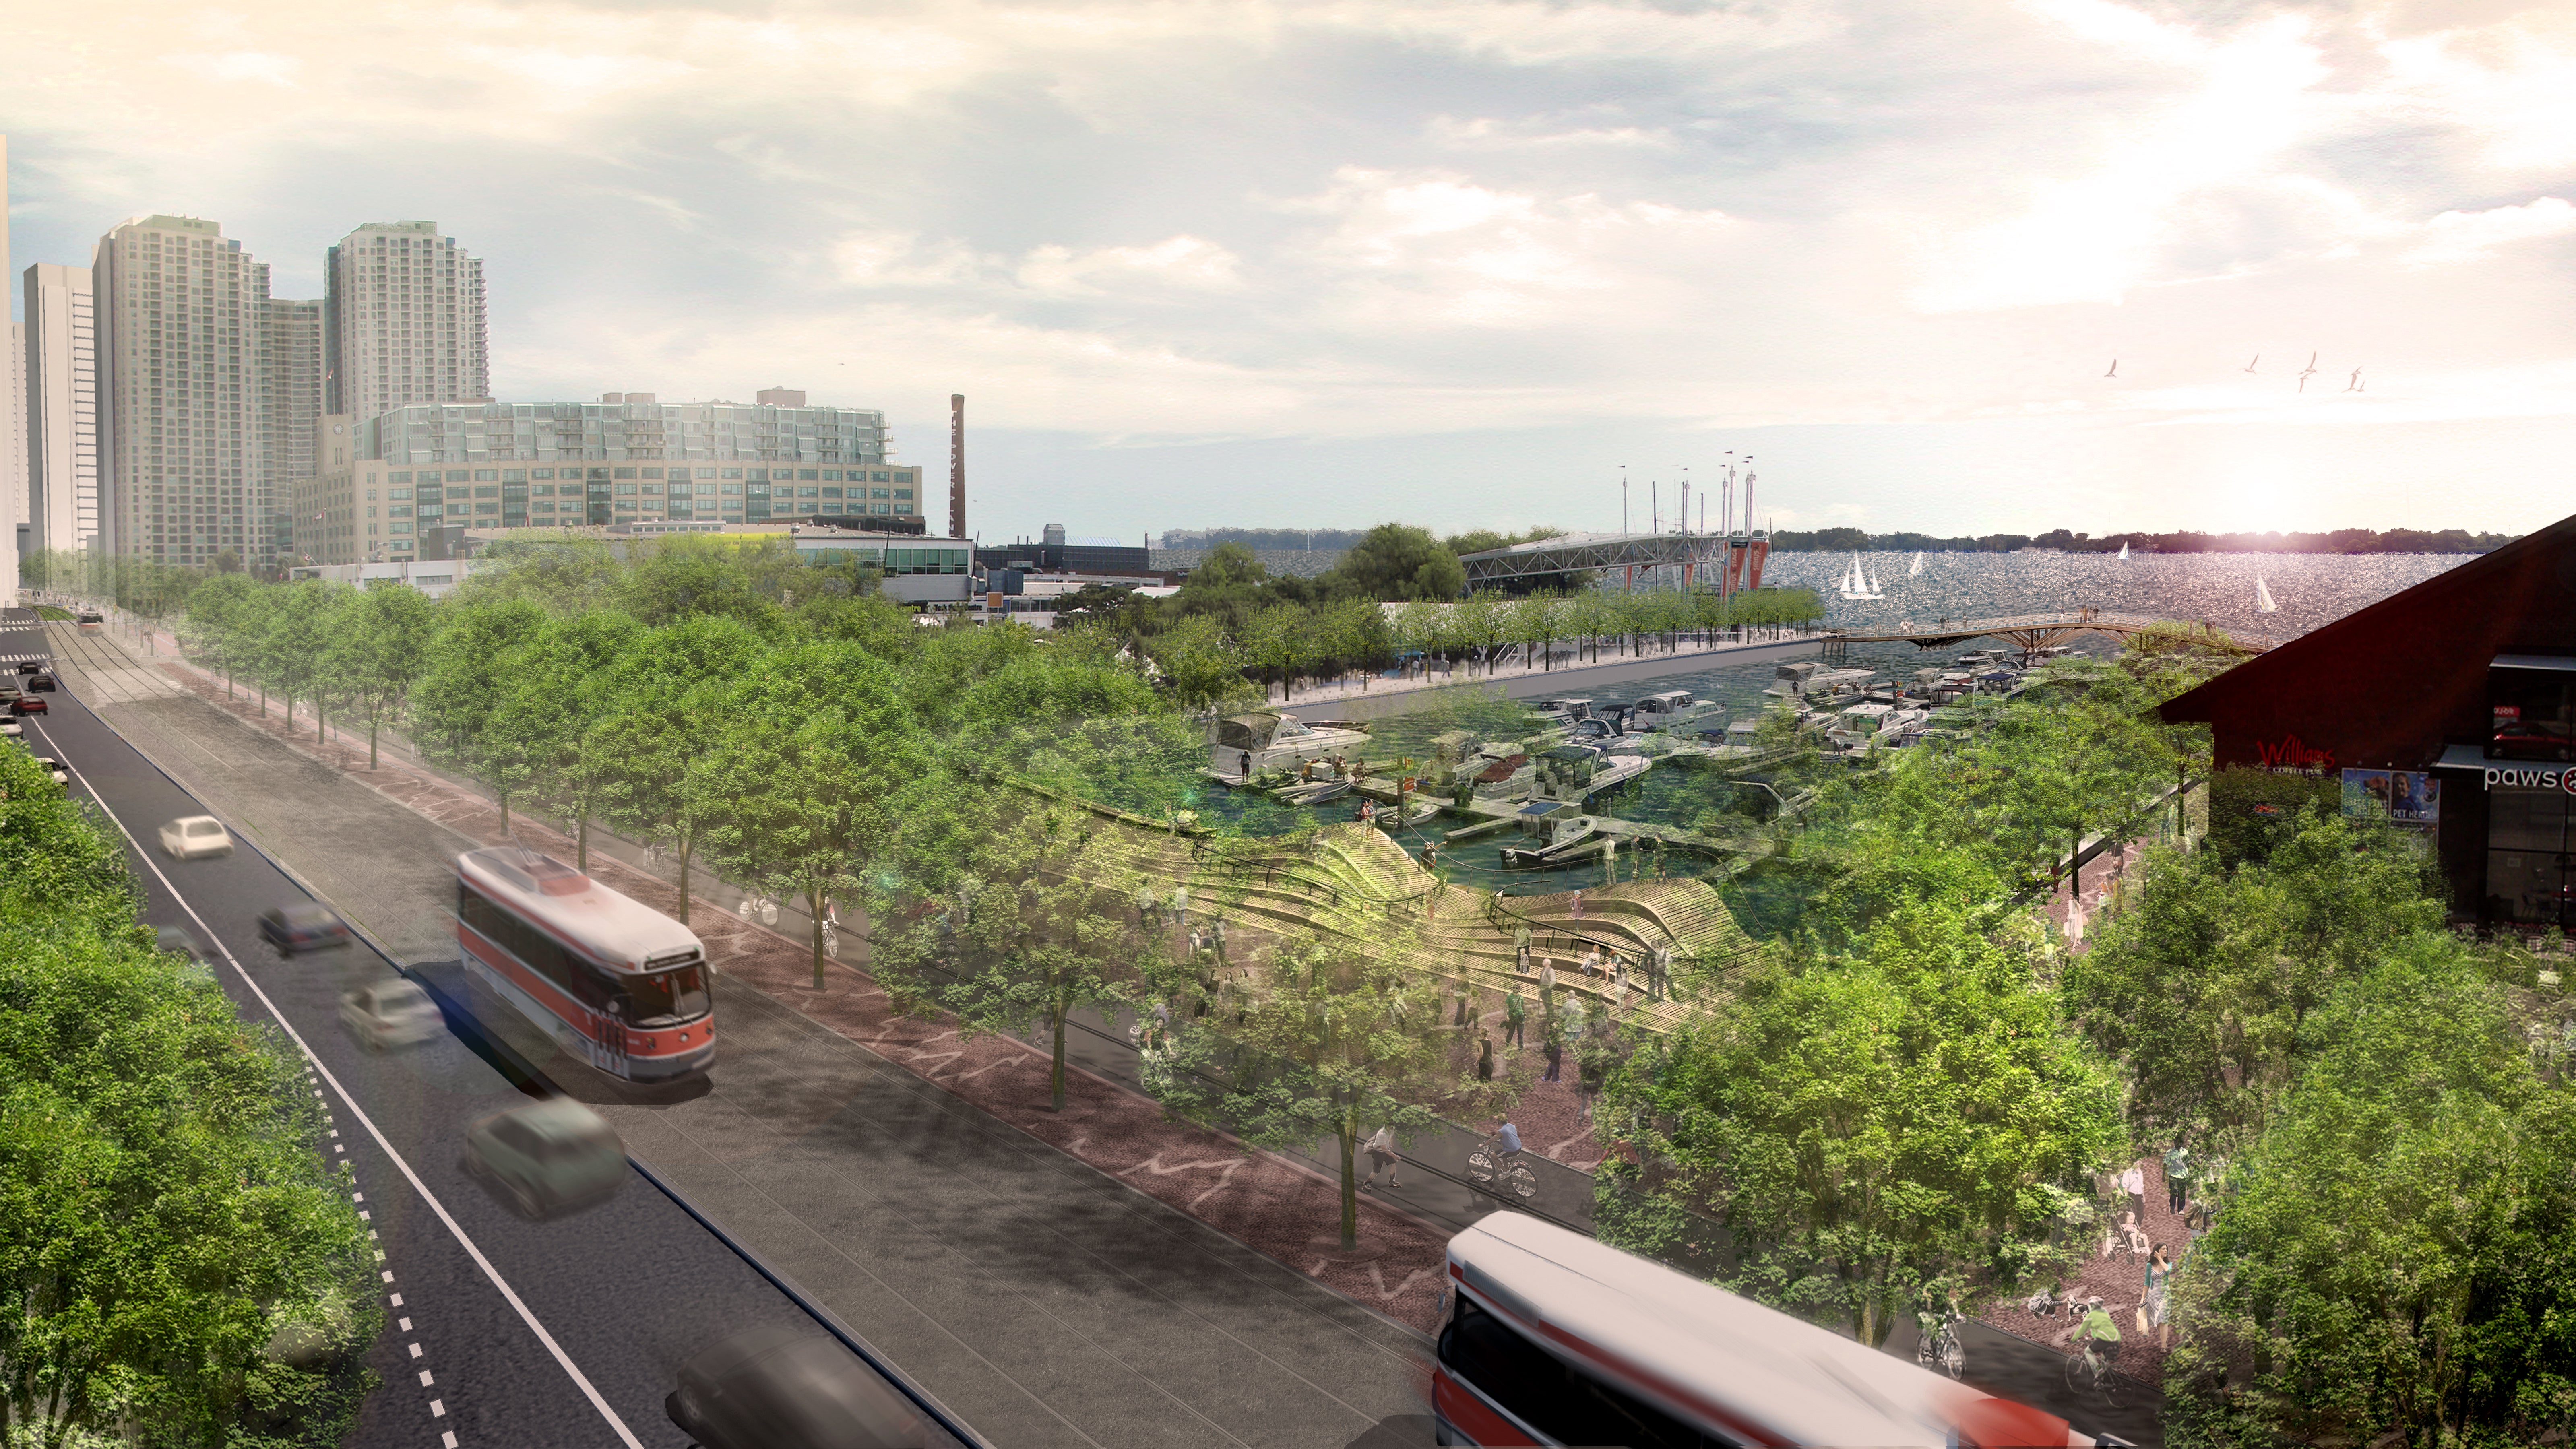 A rendering of the revitalized Queens Quay.